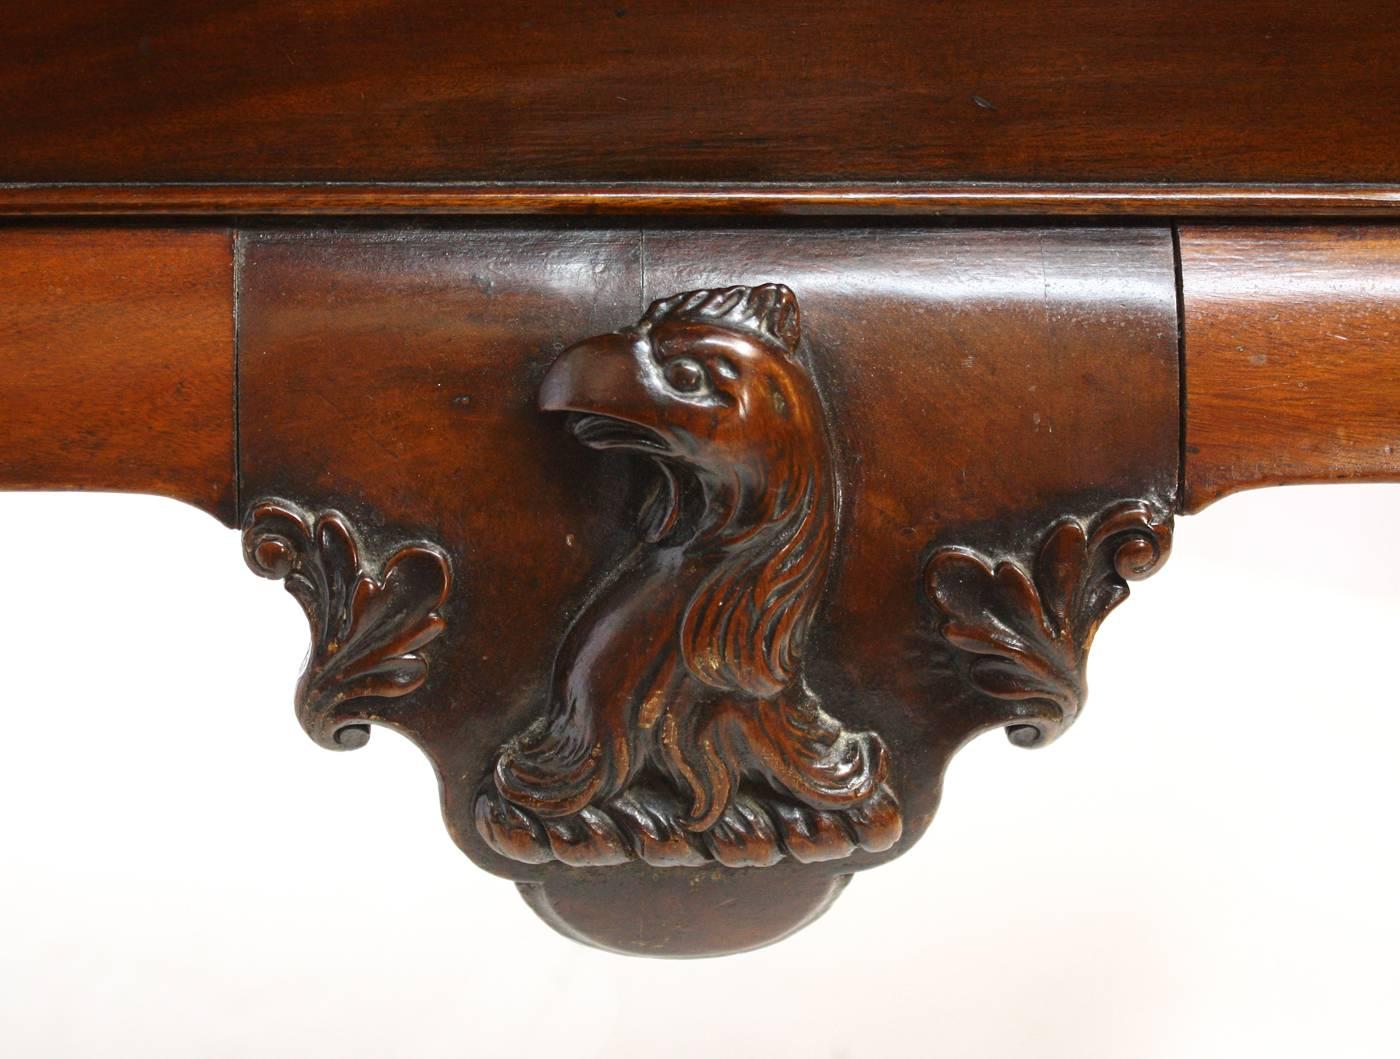 Carved George II Irish Serving Table with Crest, a Cock's Head Erased